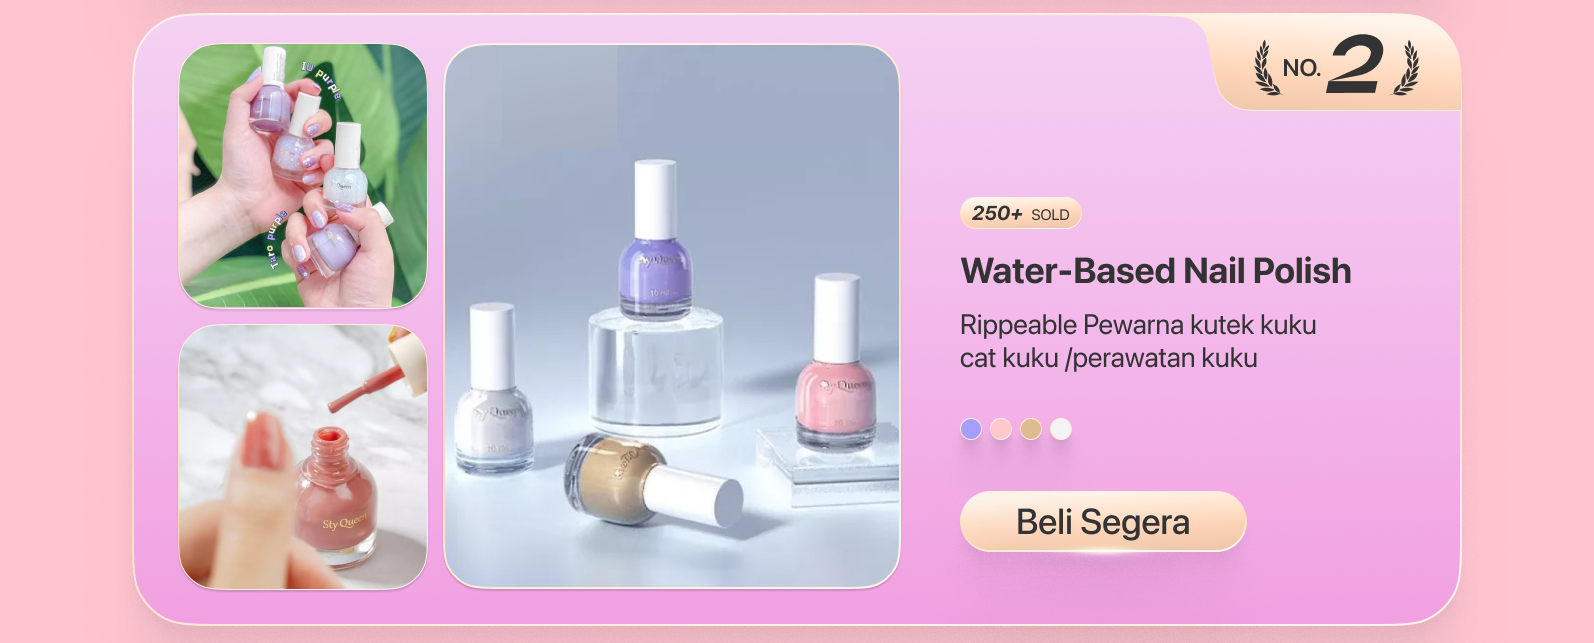 Styqueen Water-based Nail Polish